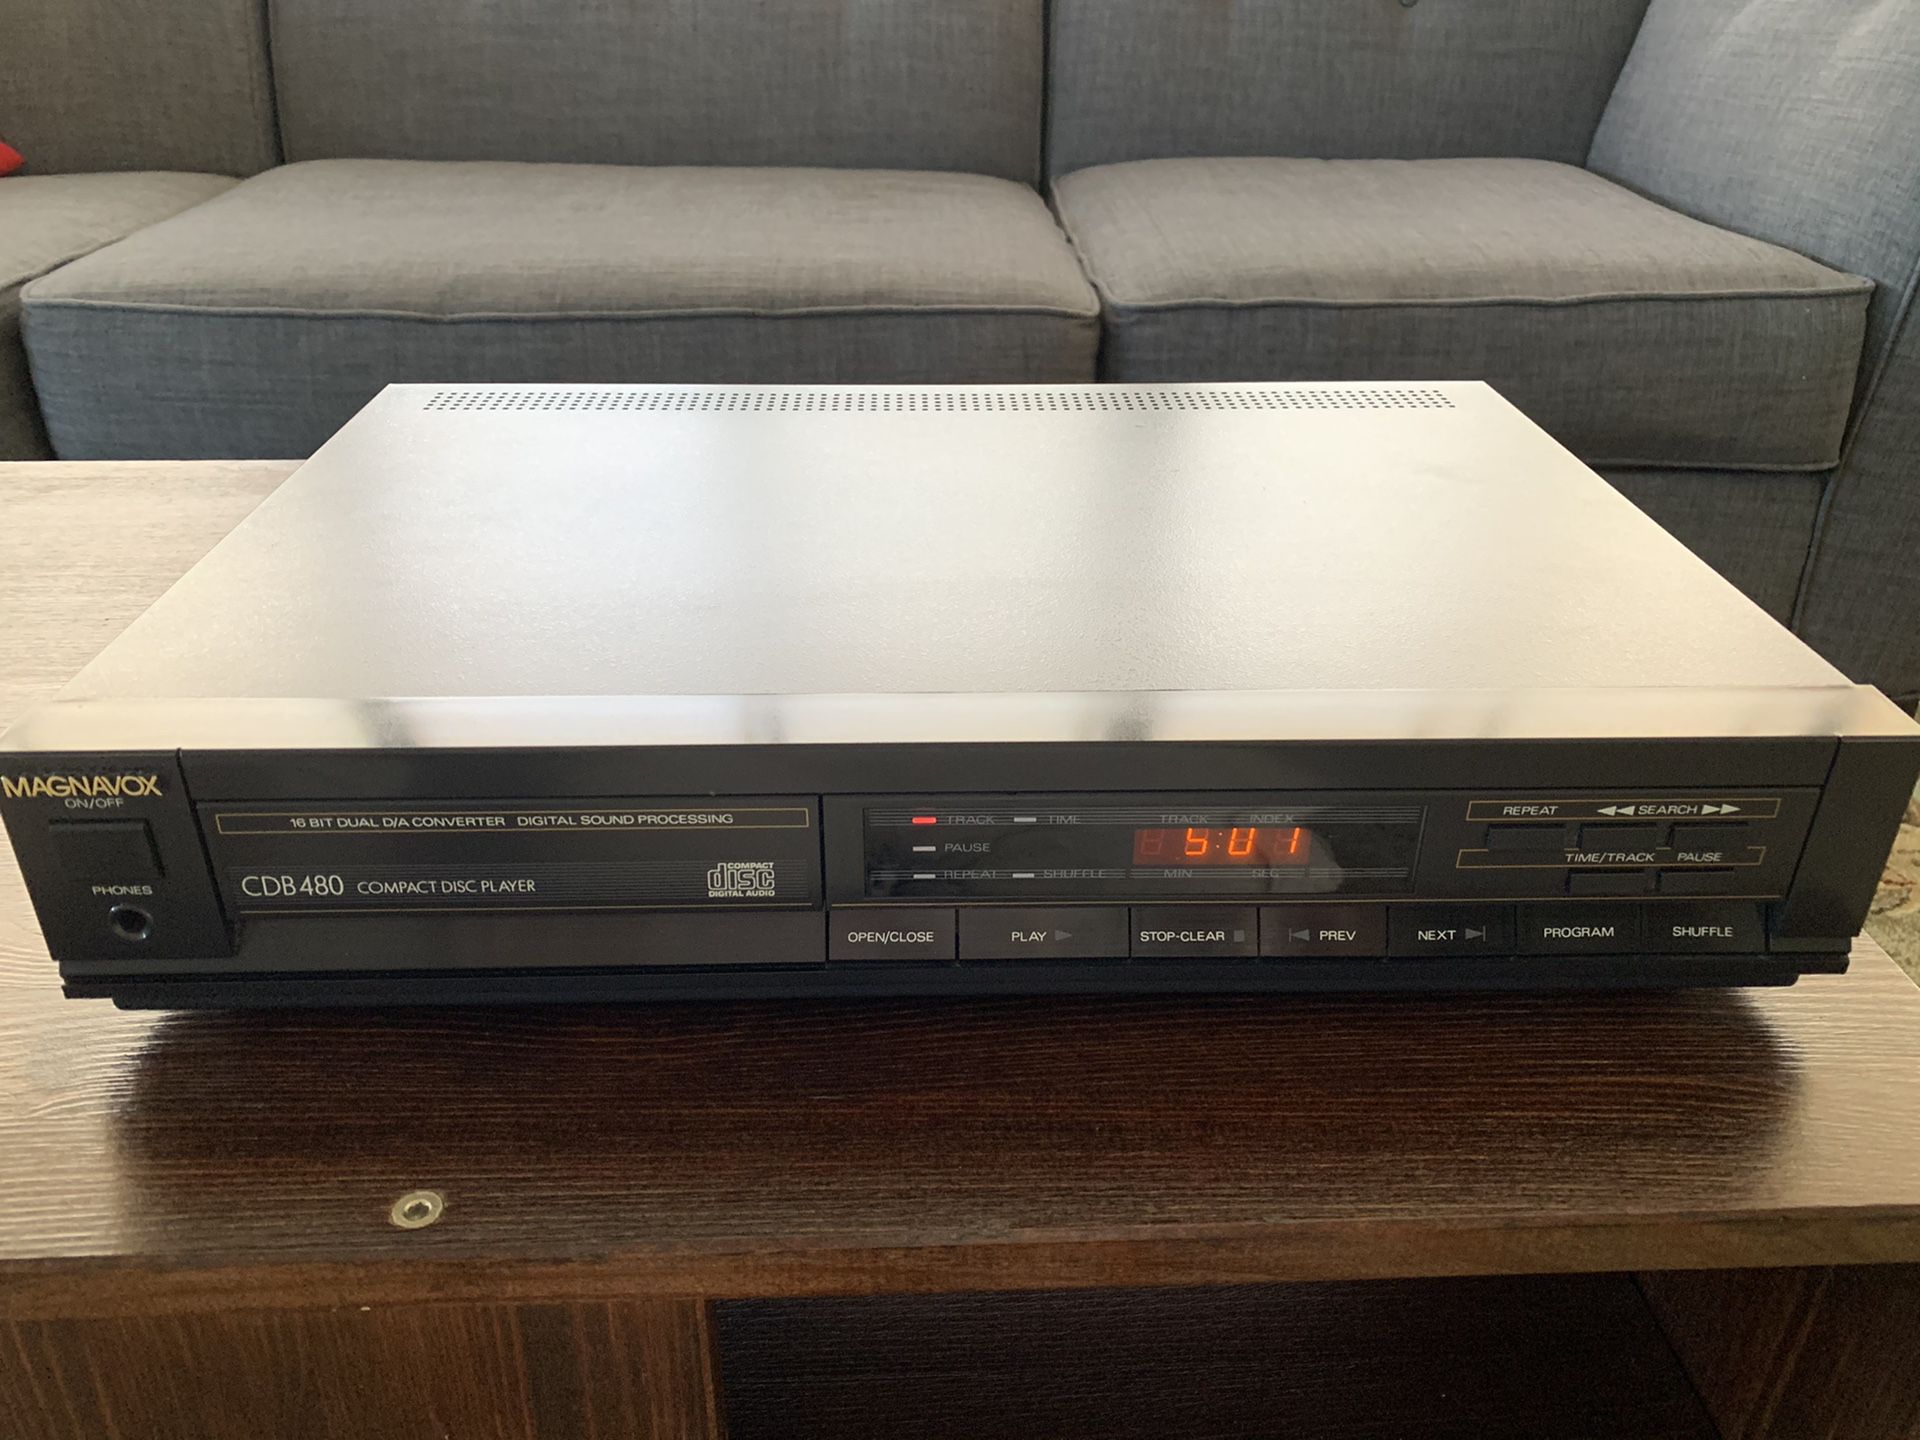 Magnavox CDB 480 CD Player. Excellent Condition and Fully Operational